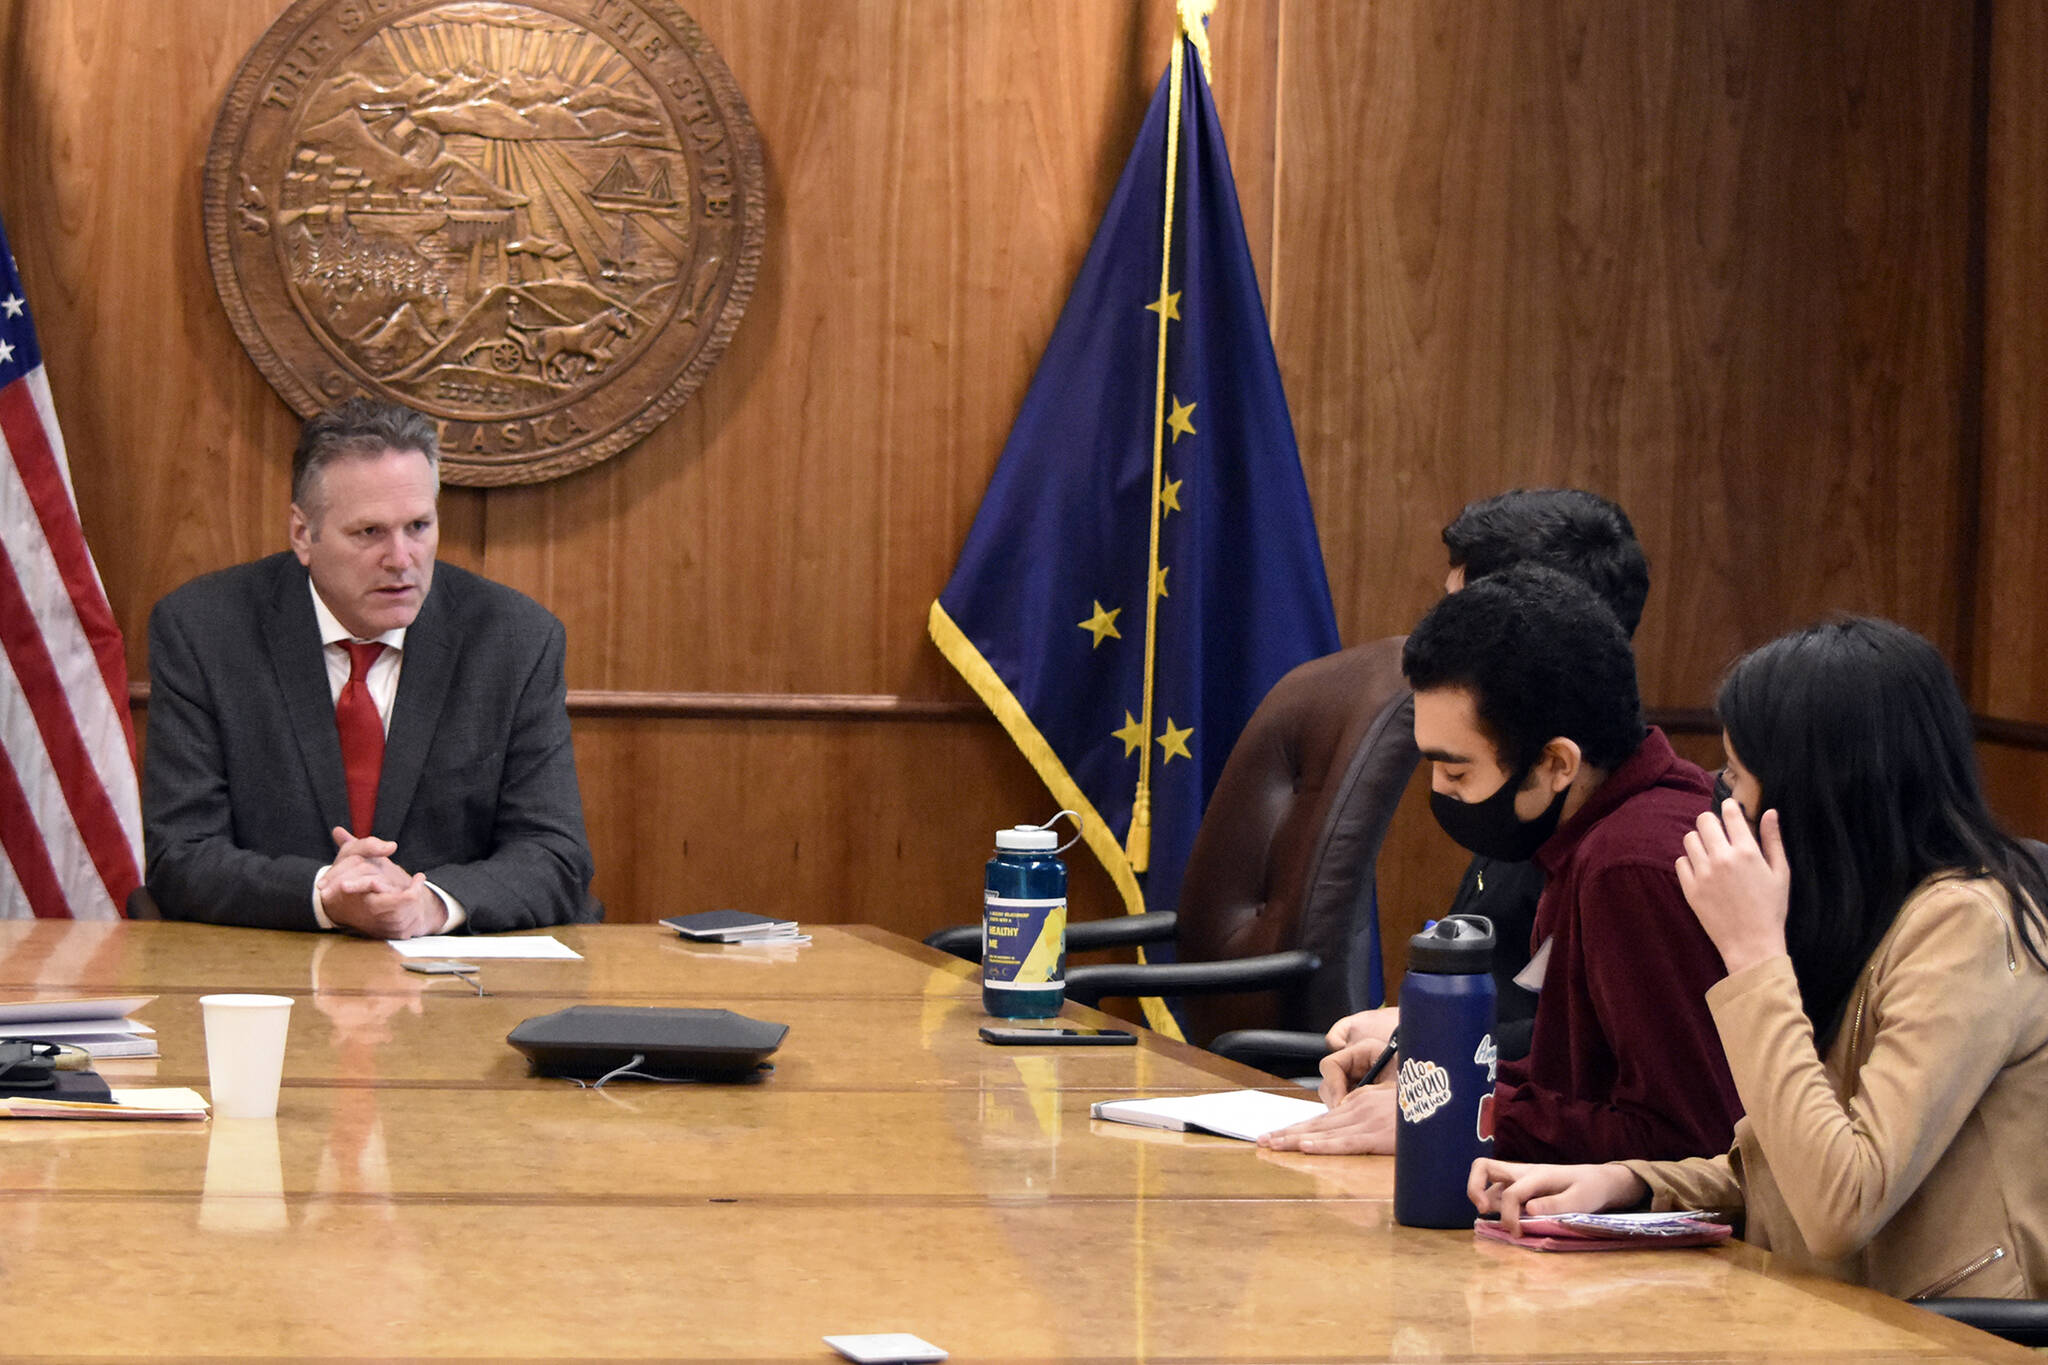 Peter Segall / Juneau Empire 
Gov. Mike Dunleavy, left, meets with international exchange students at the Alaska State Capitol on Wednesday, March 16, 2022. The students, who each come from different countries, have been living with host families in Sitka and Juneau and attending local high schools.